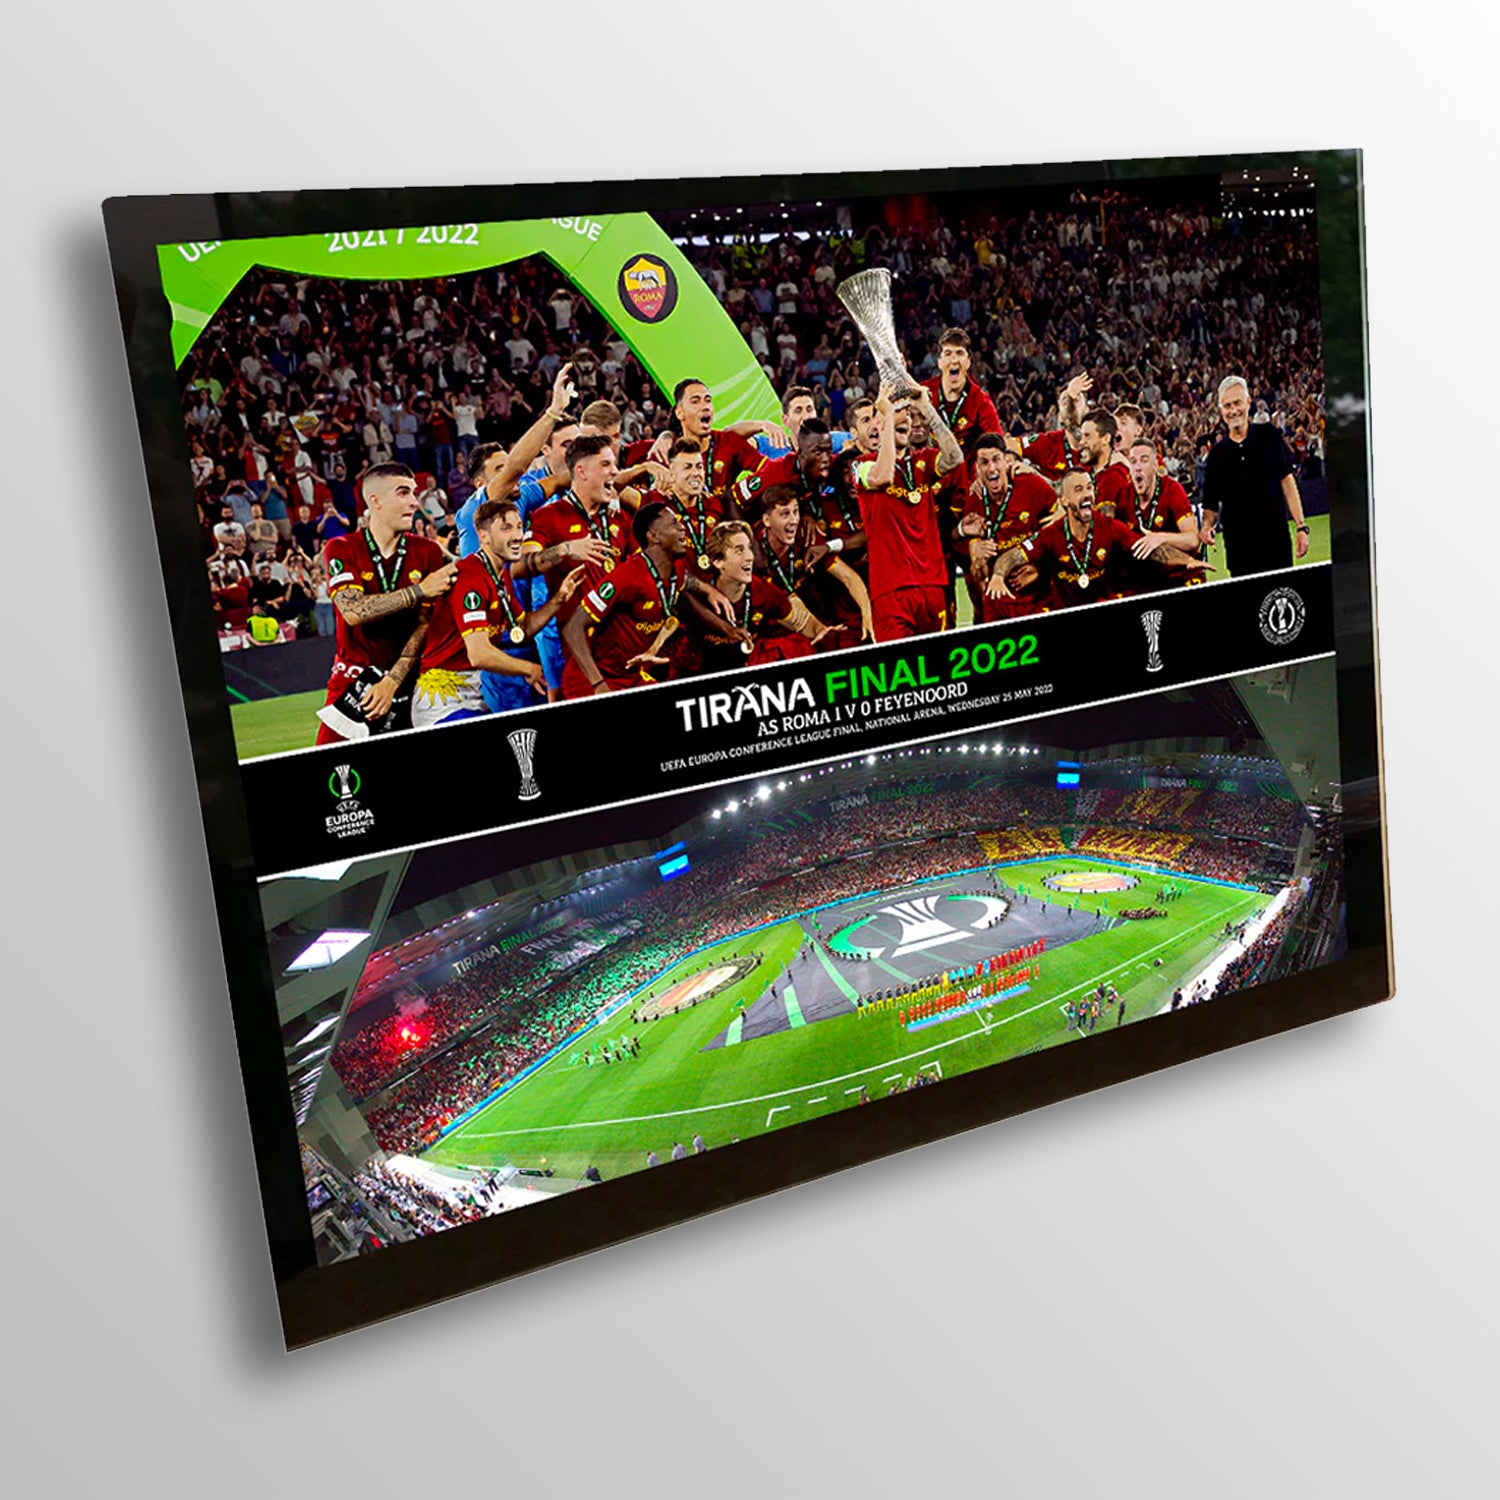 Tirana Tempered Glass Celebration Montage featuring trophy lift and Panoramic Line Up 8x6 - Conference League Final UEFA Club Competitions Online Store